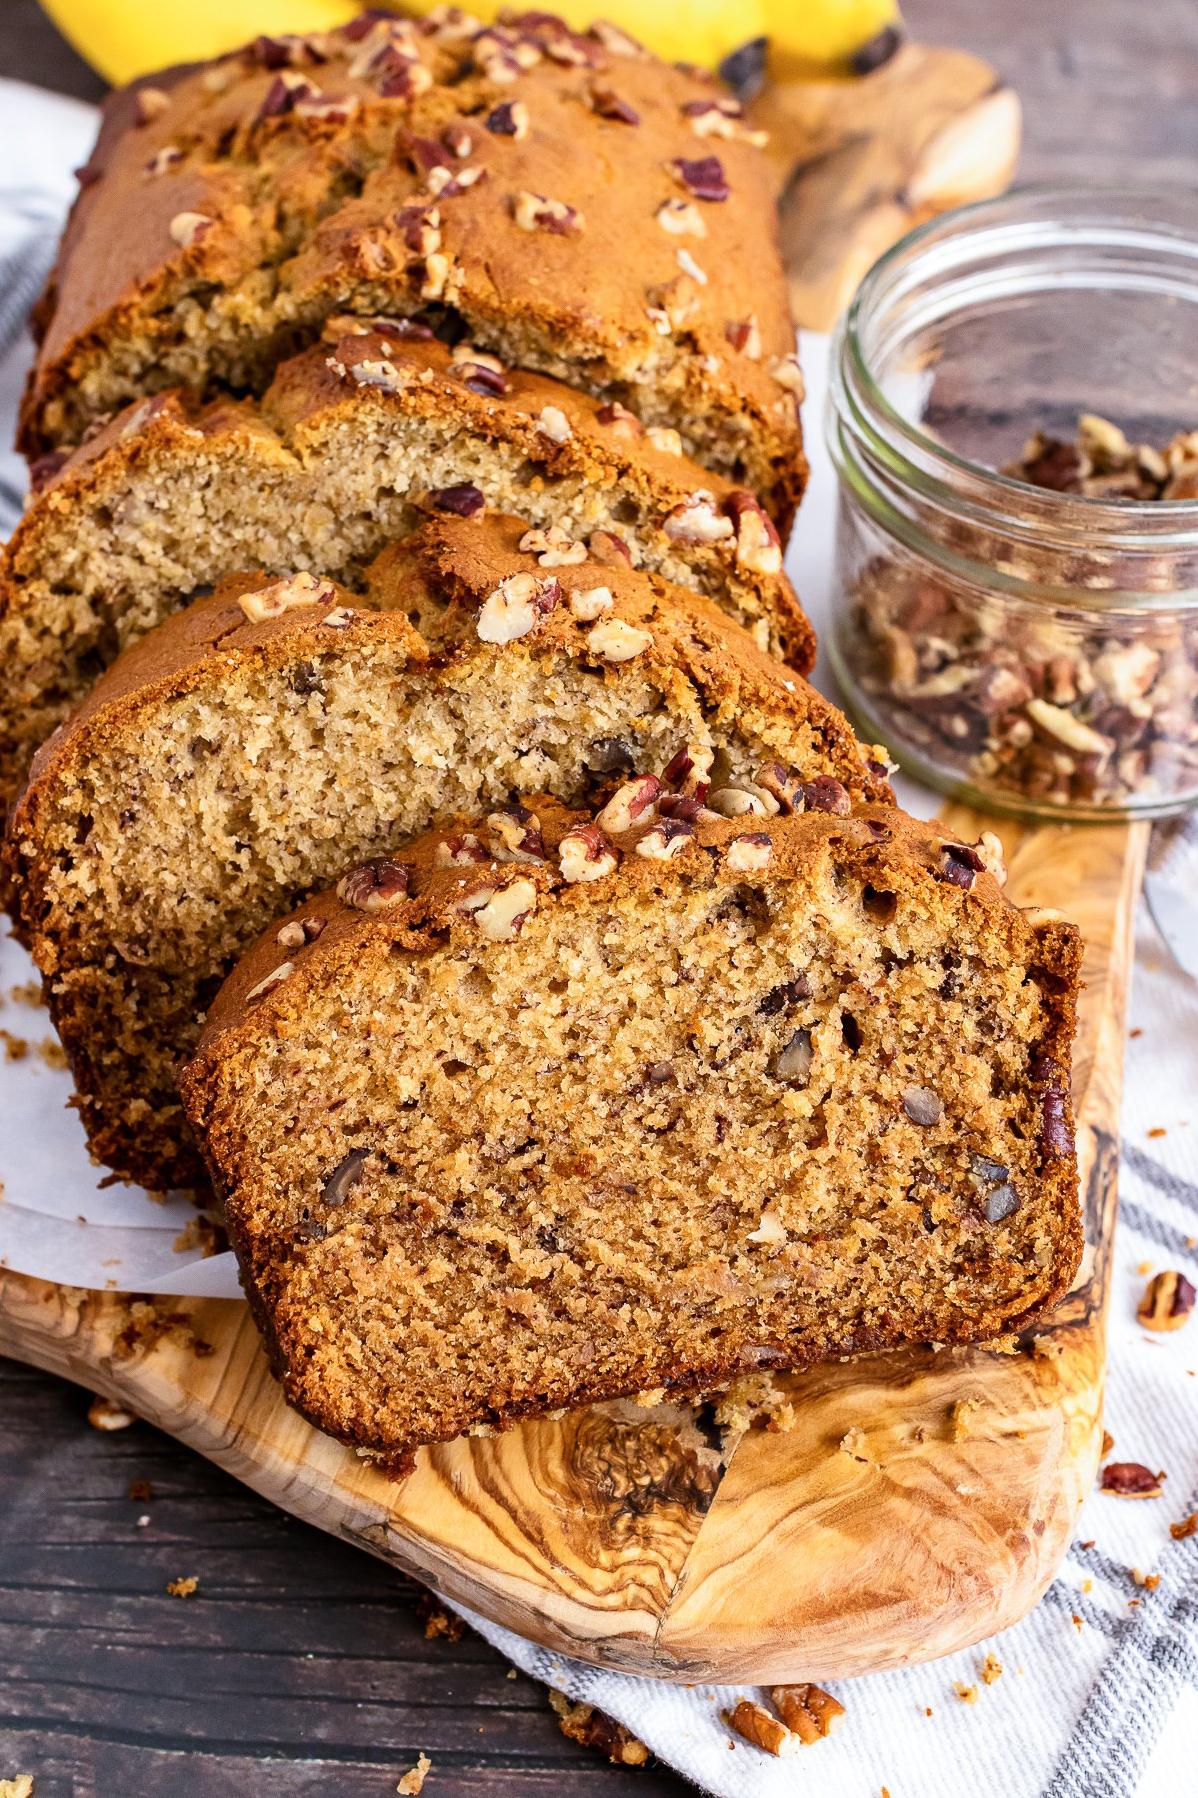  The perfect way to use up ripe bananas